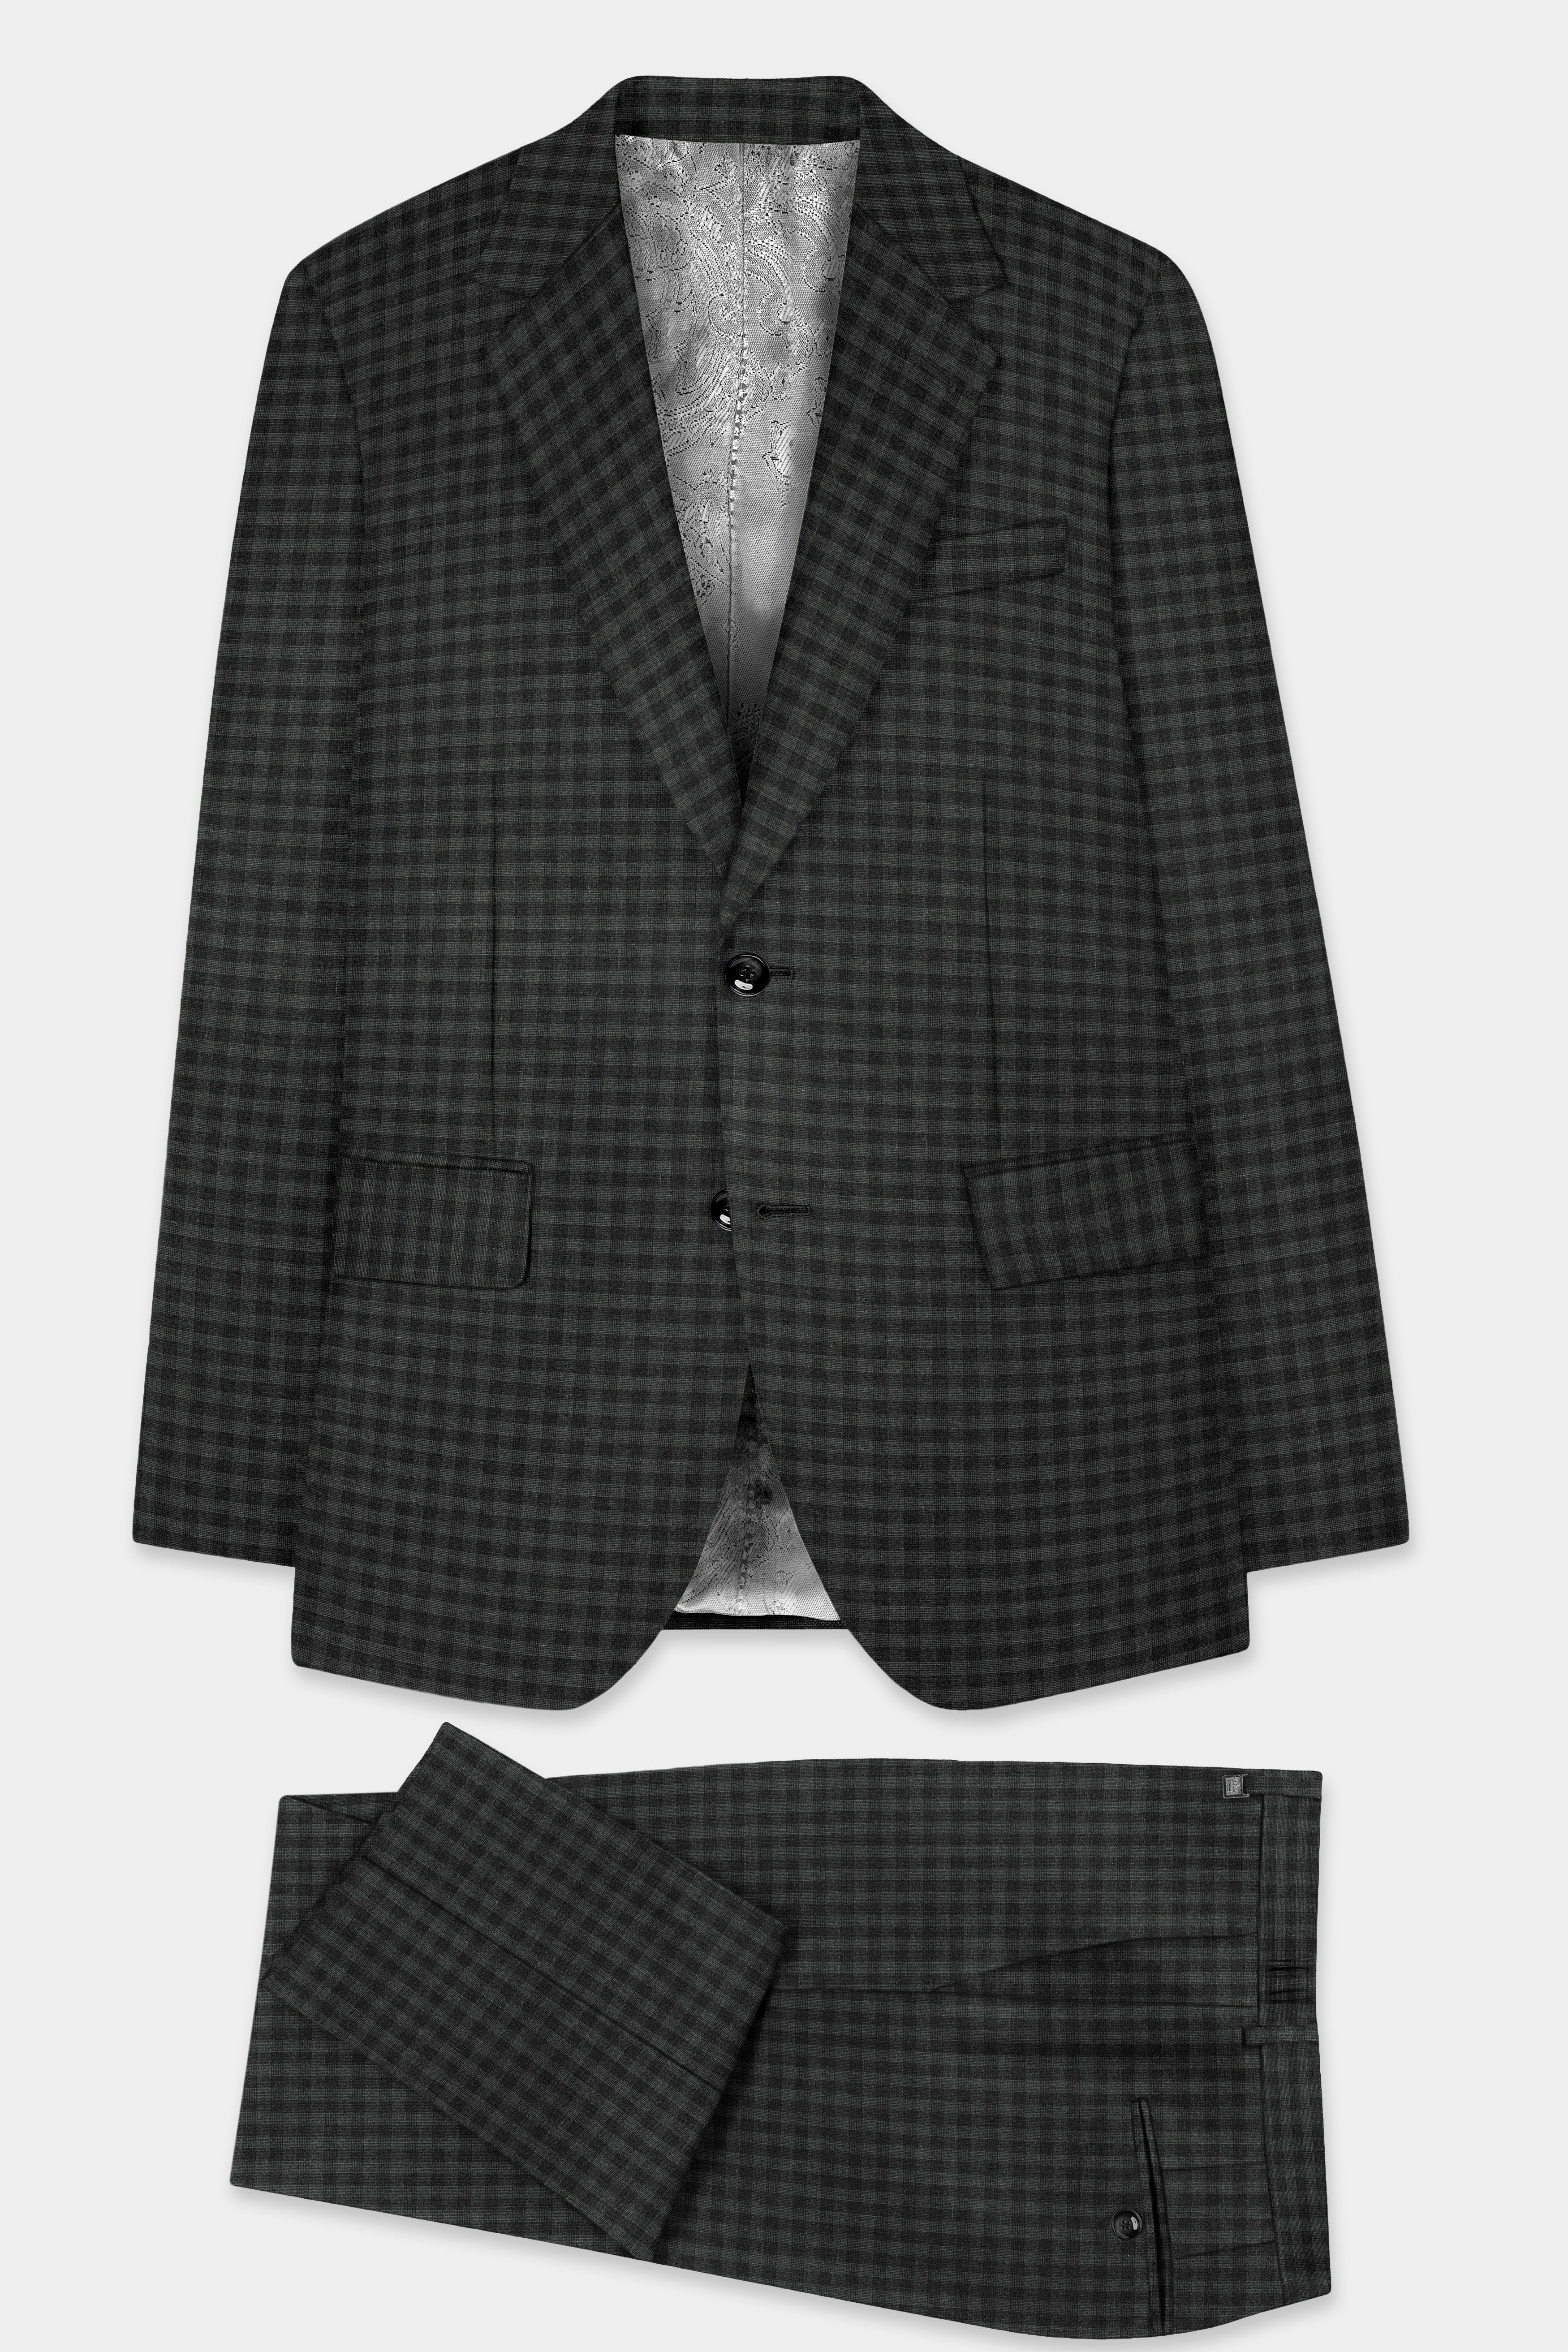 Piano Gray Plaid Wool Blend Single Breasted Suit